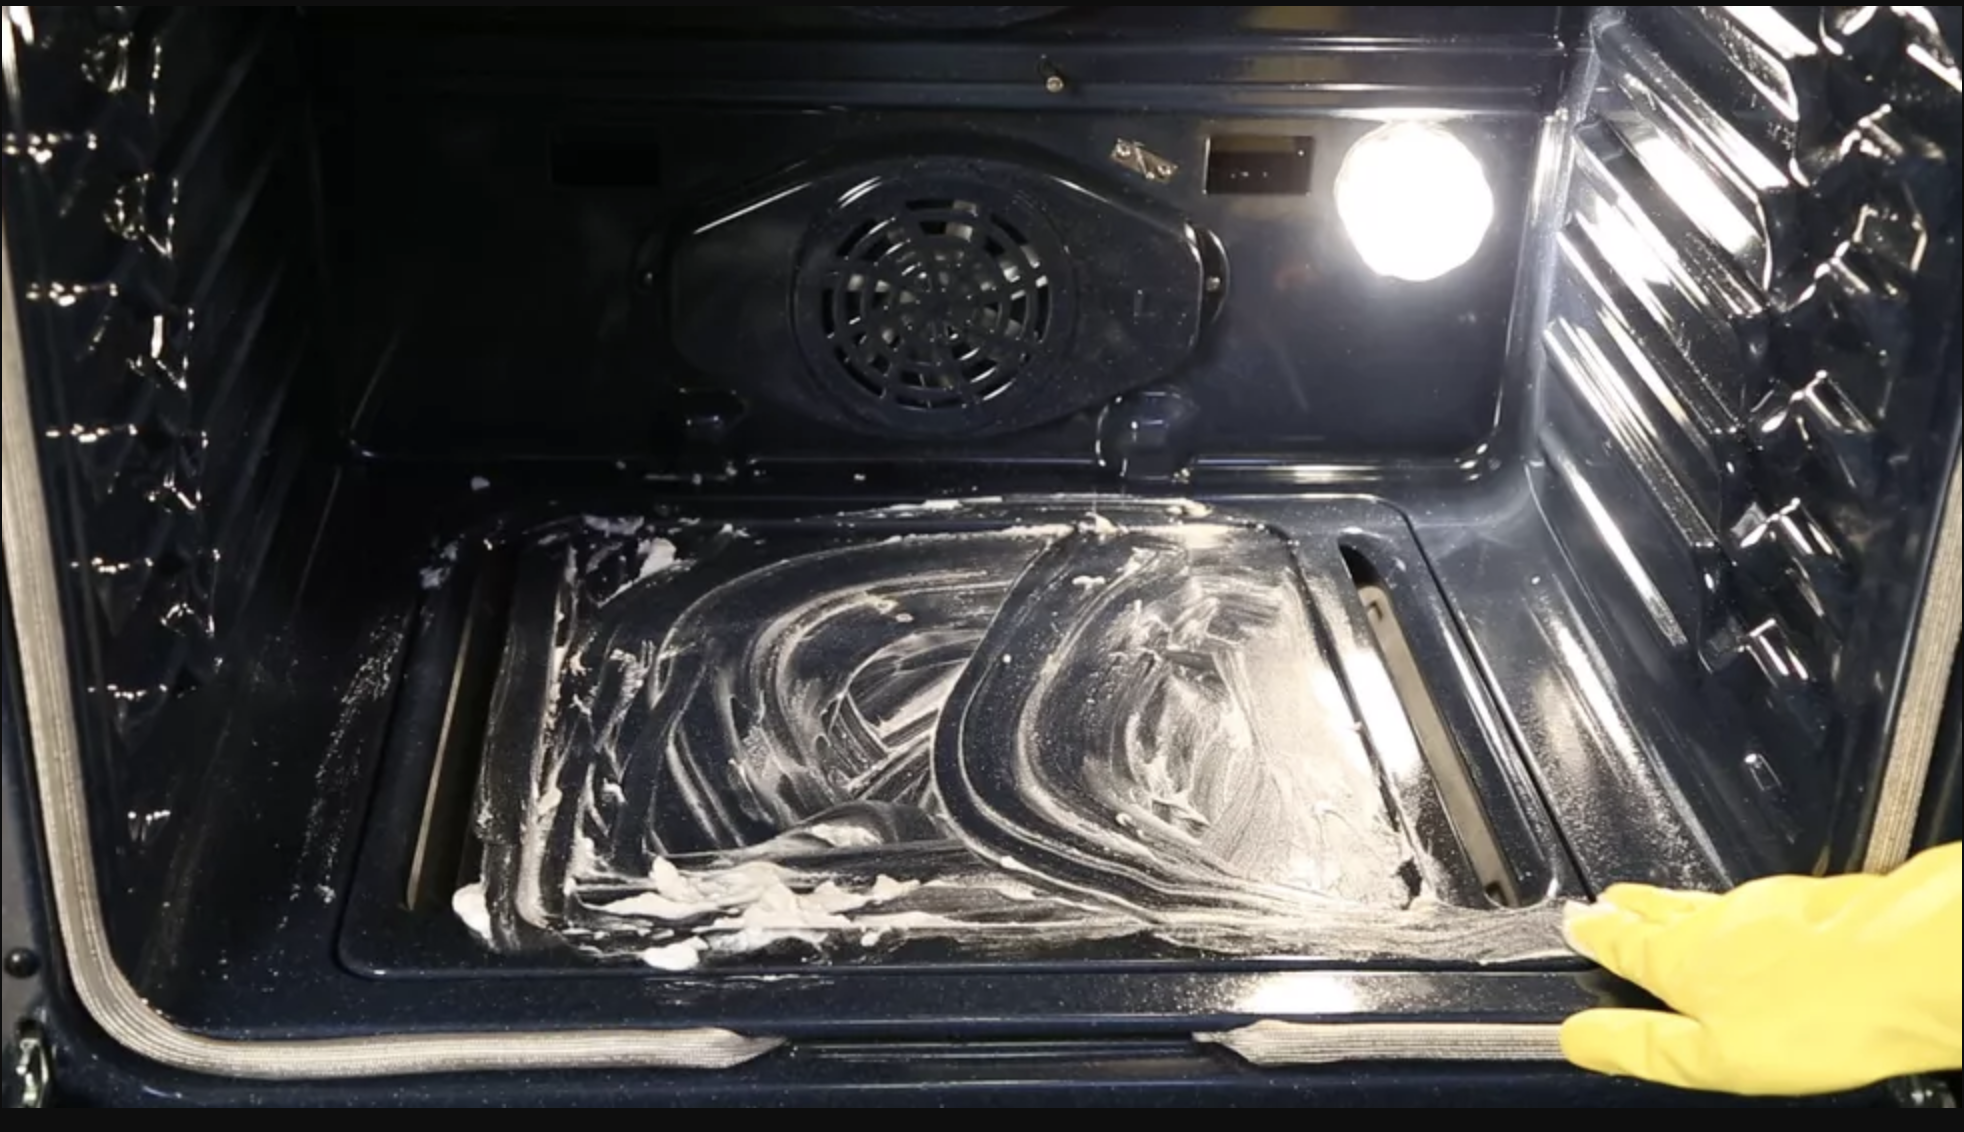 cleaning oven baking soda